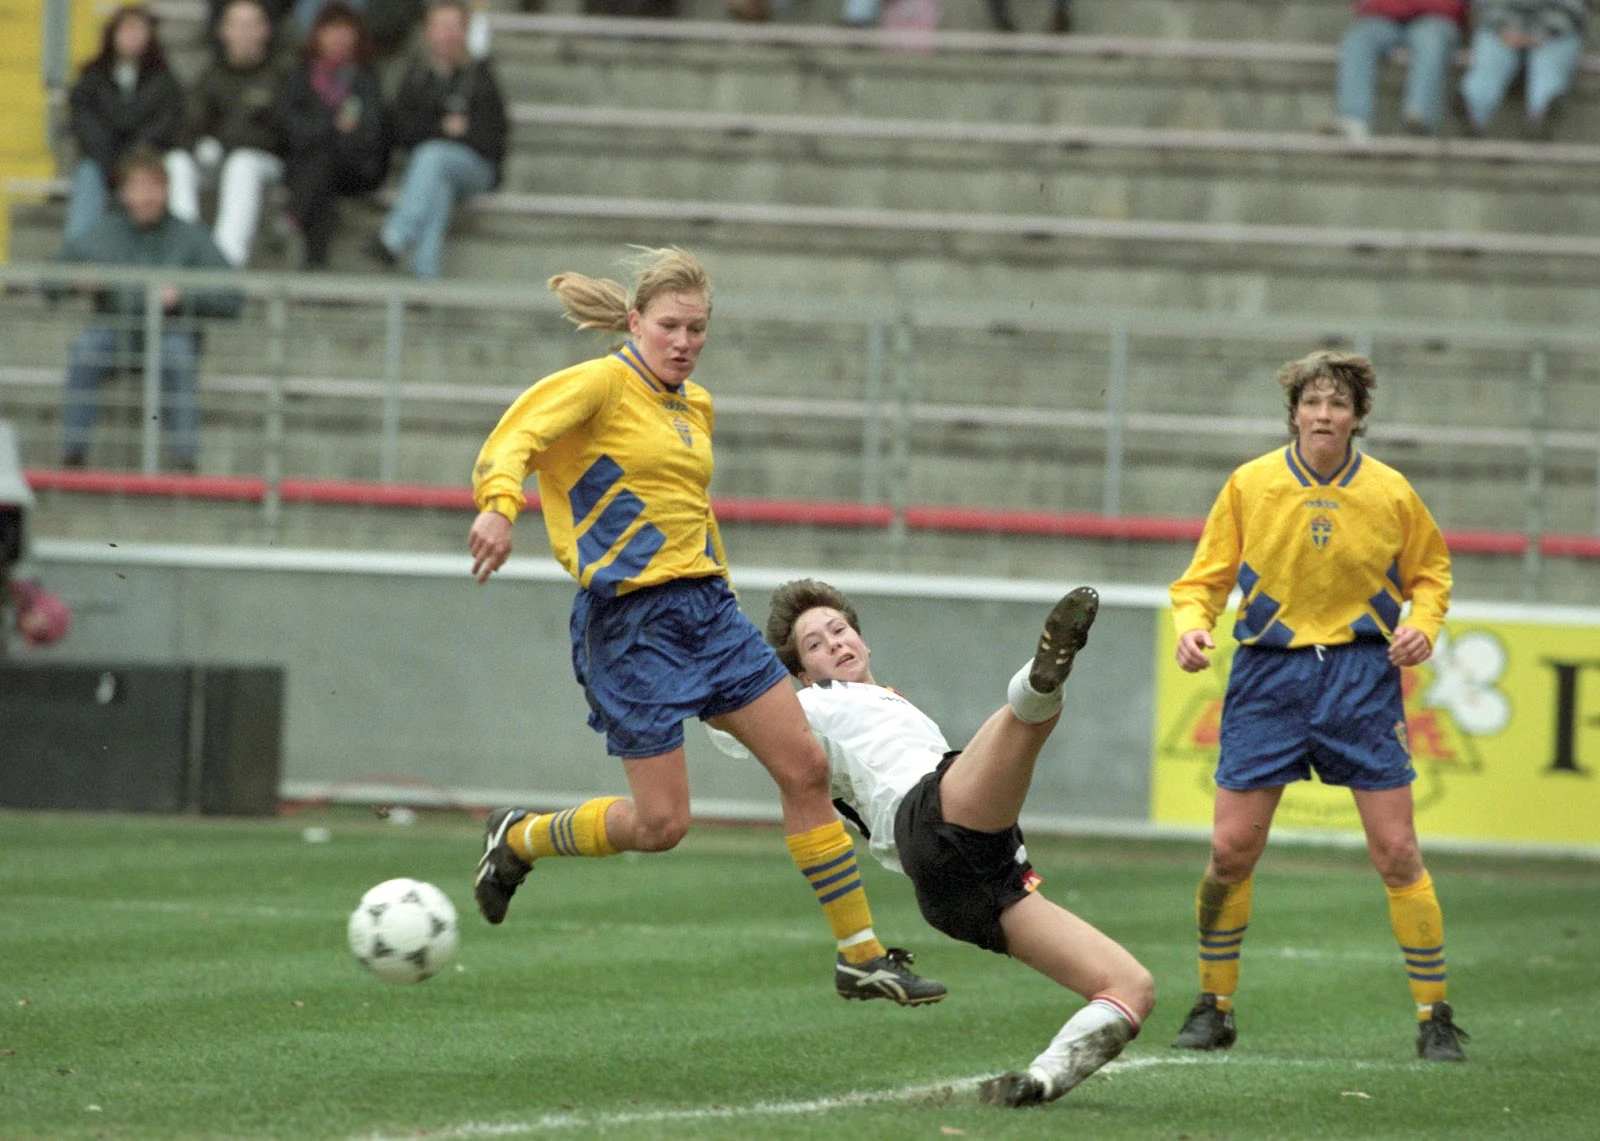 Two of Sweden's players during a 1995 match.